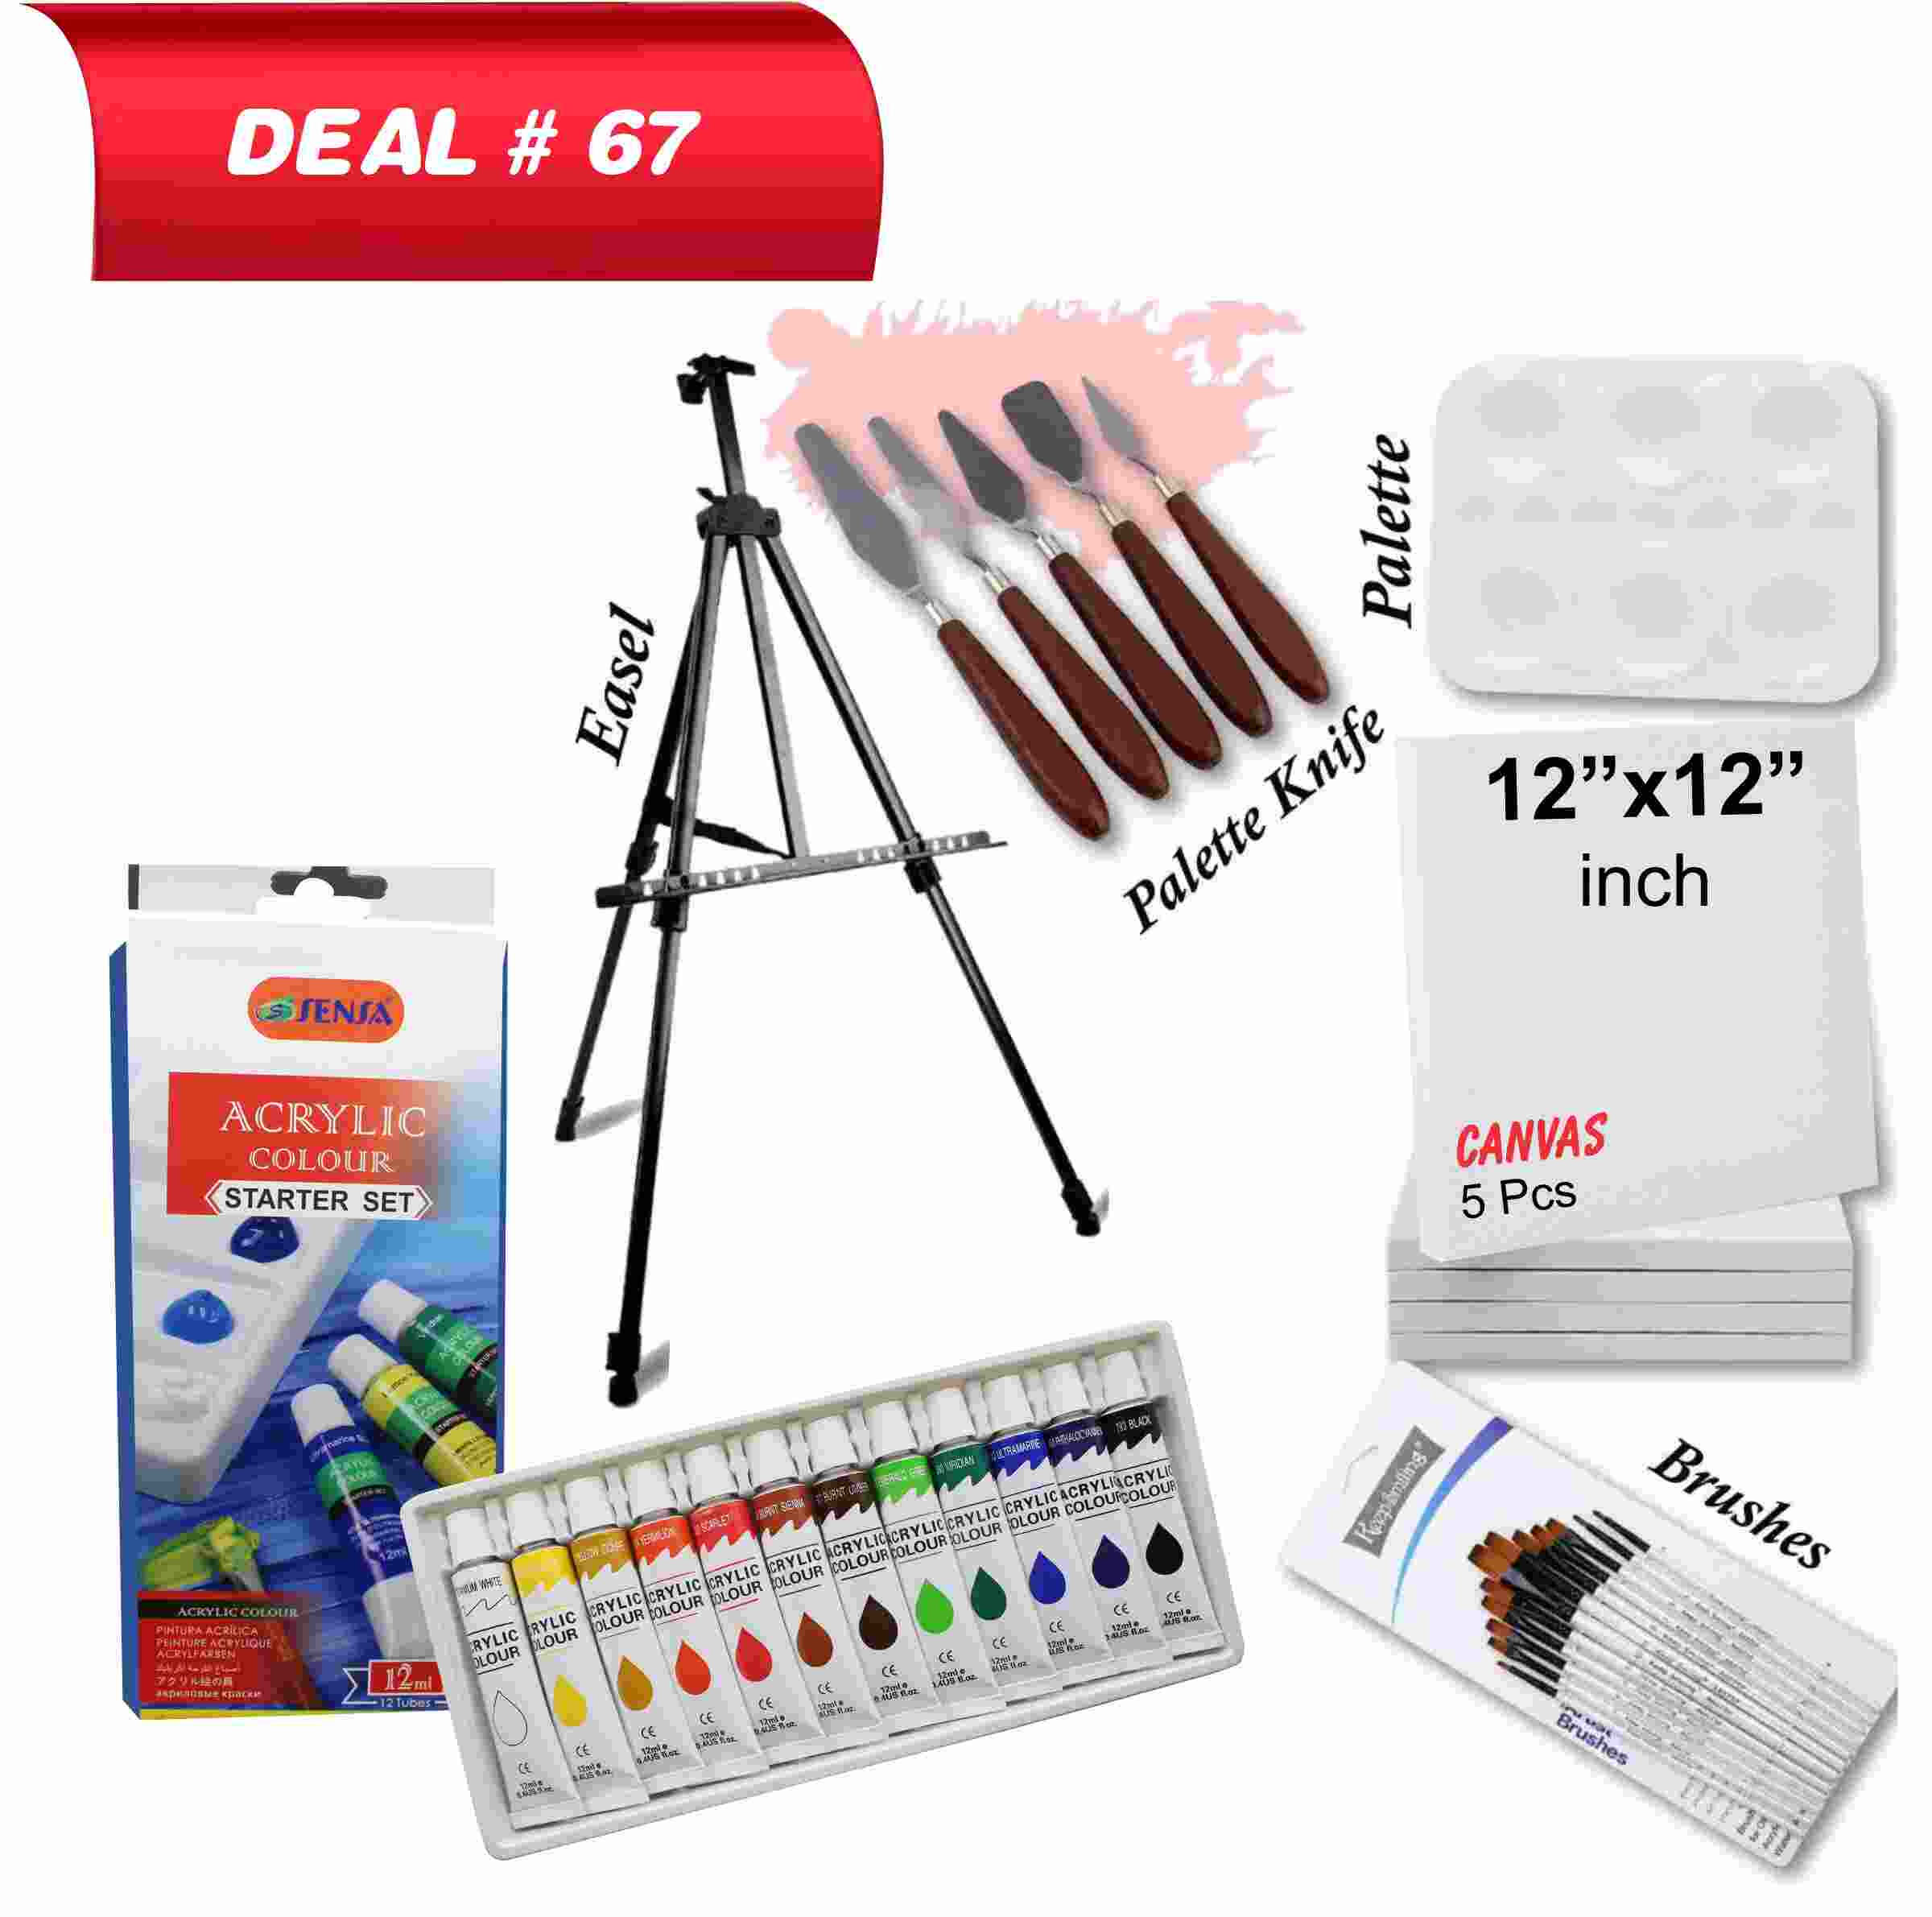 Acrylic & Oil Painting Kit, Deal No.139